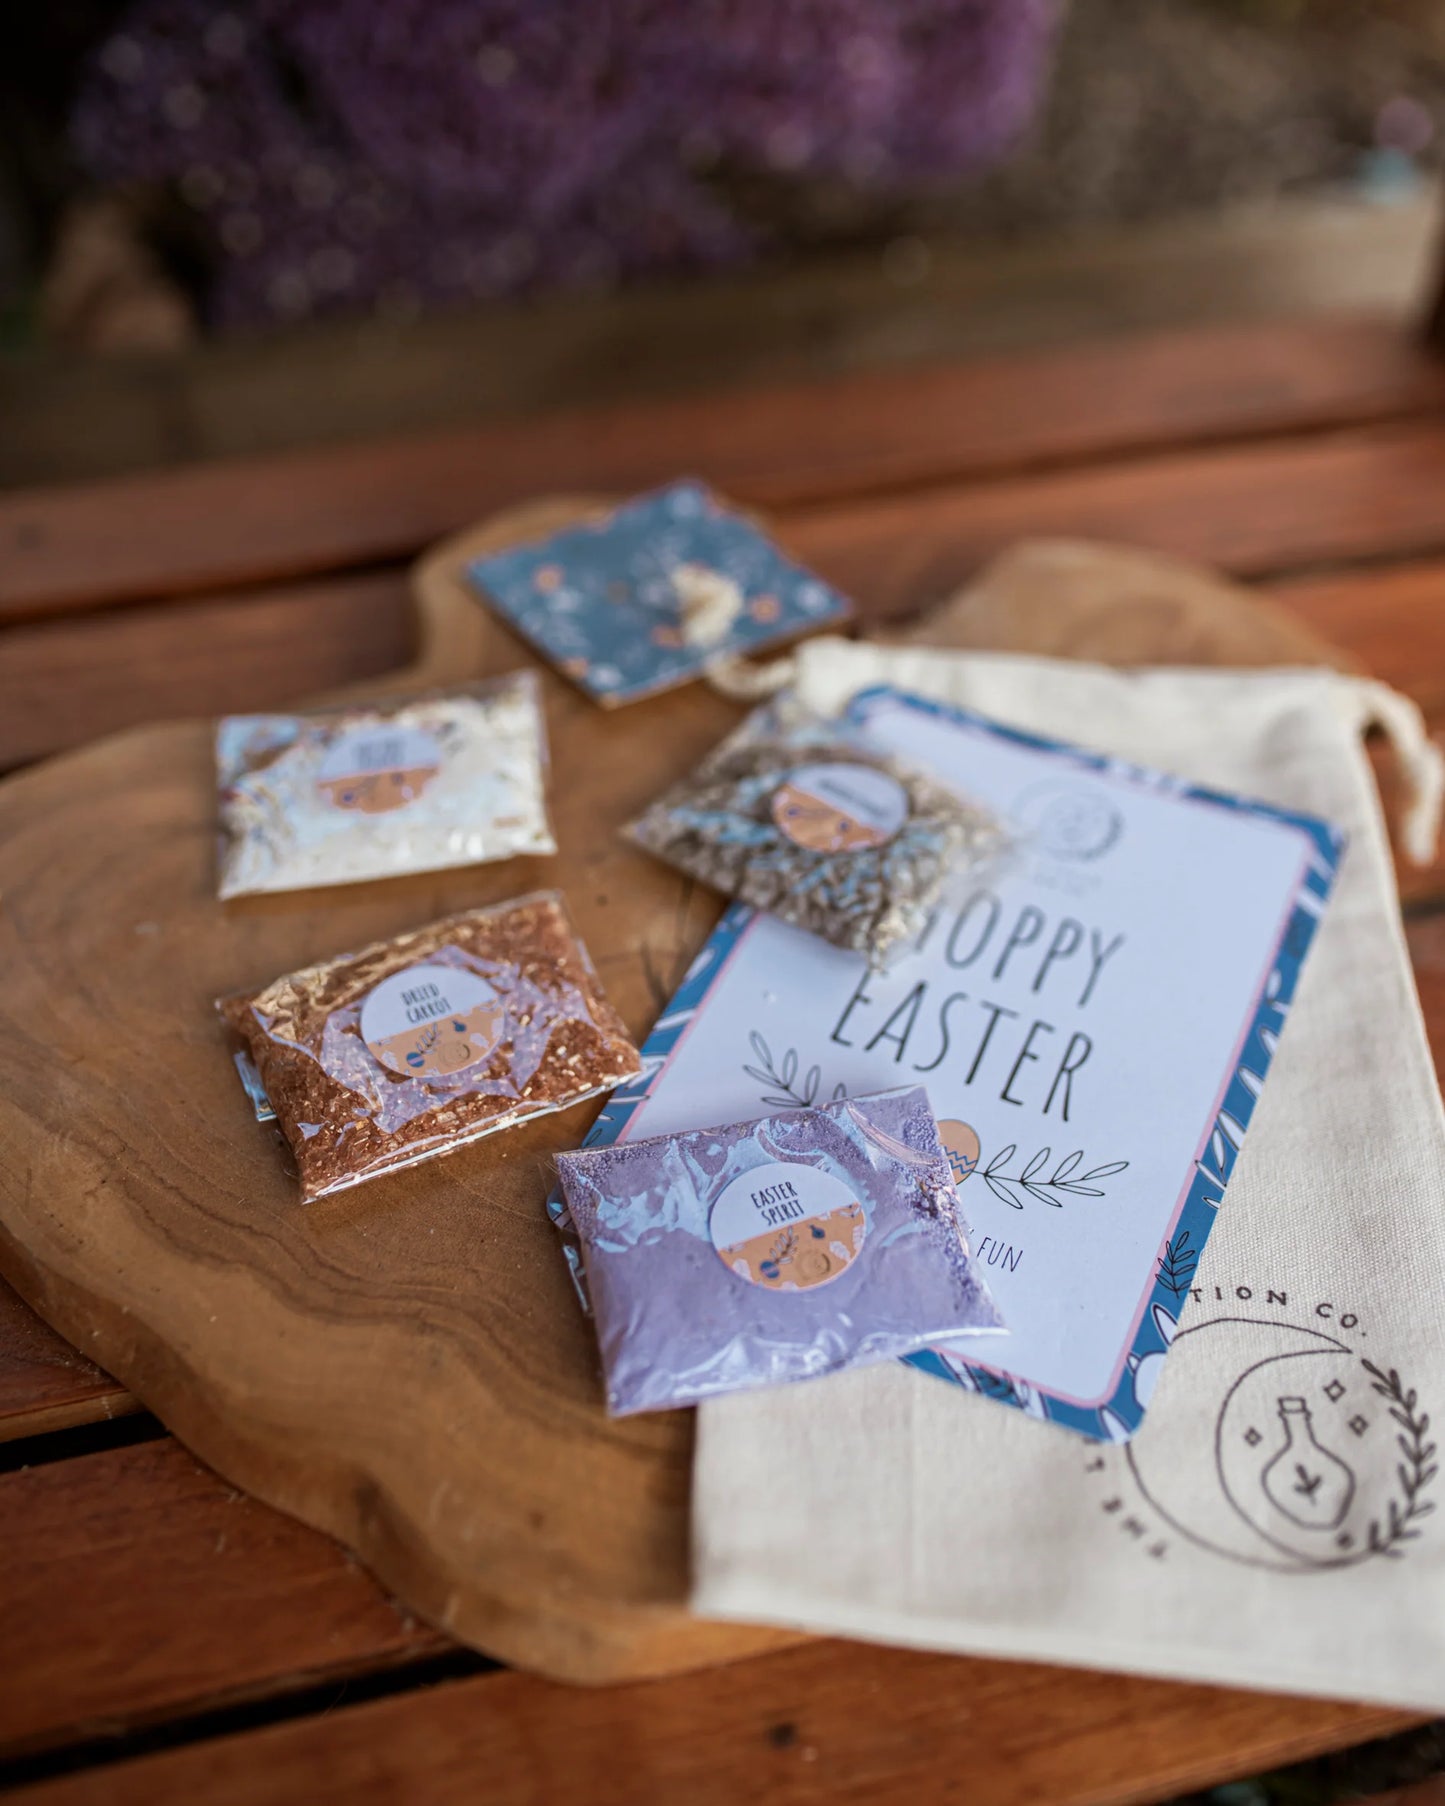 Hoppy Easter Potion Pouch Magic Kit - Call the Easter Bunny